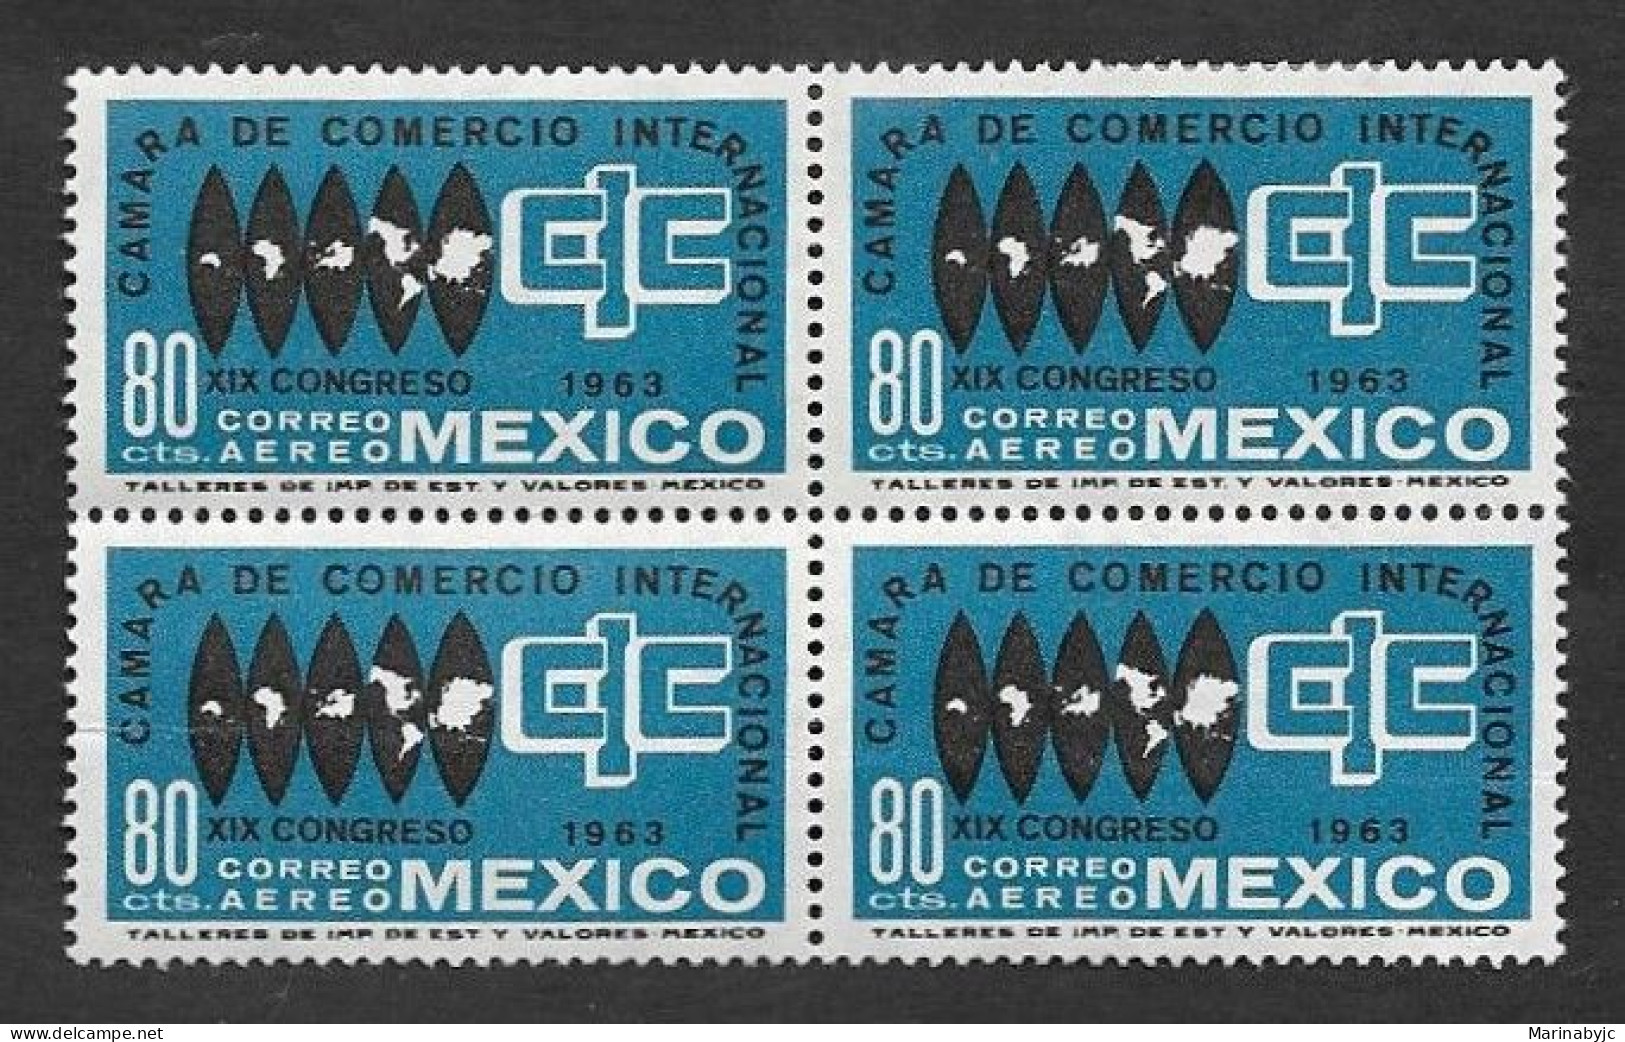 SD)1963 MEXICO  19th CONGRESS OF THE INTERNATIONAL CHAMBER OF COMMERCE 80C SCT C271, B/4 LEFT SIDE WITH HINGE - Mexico